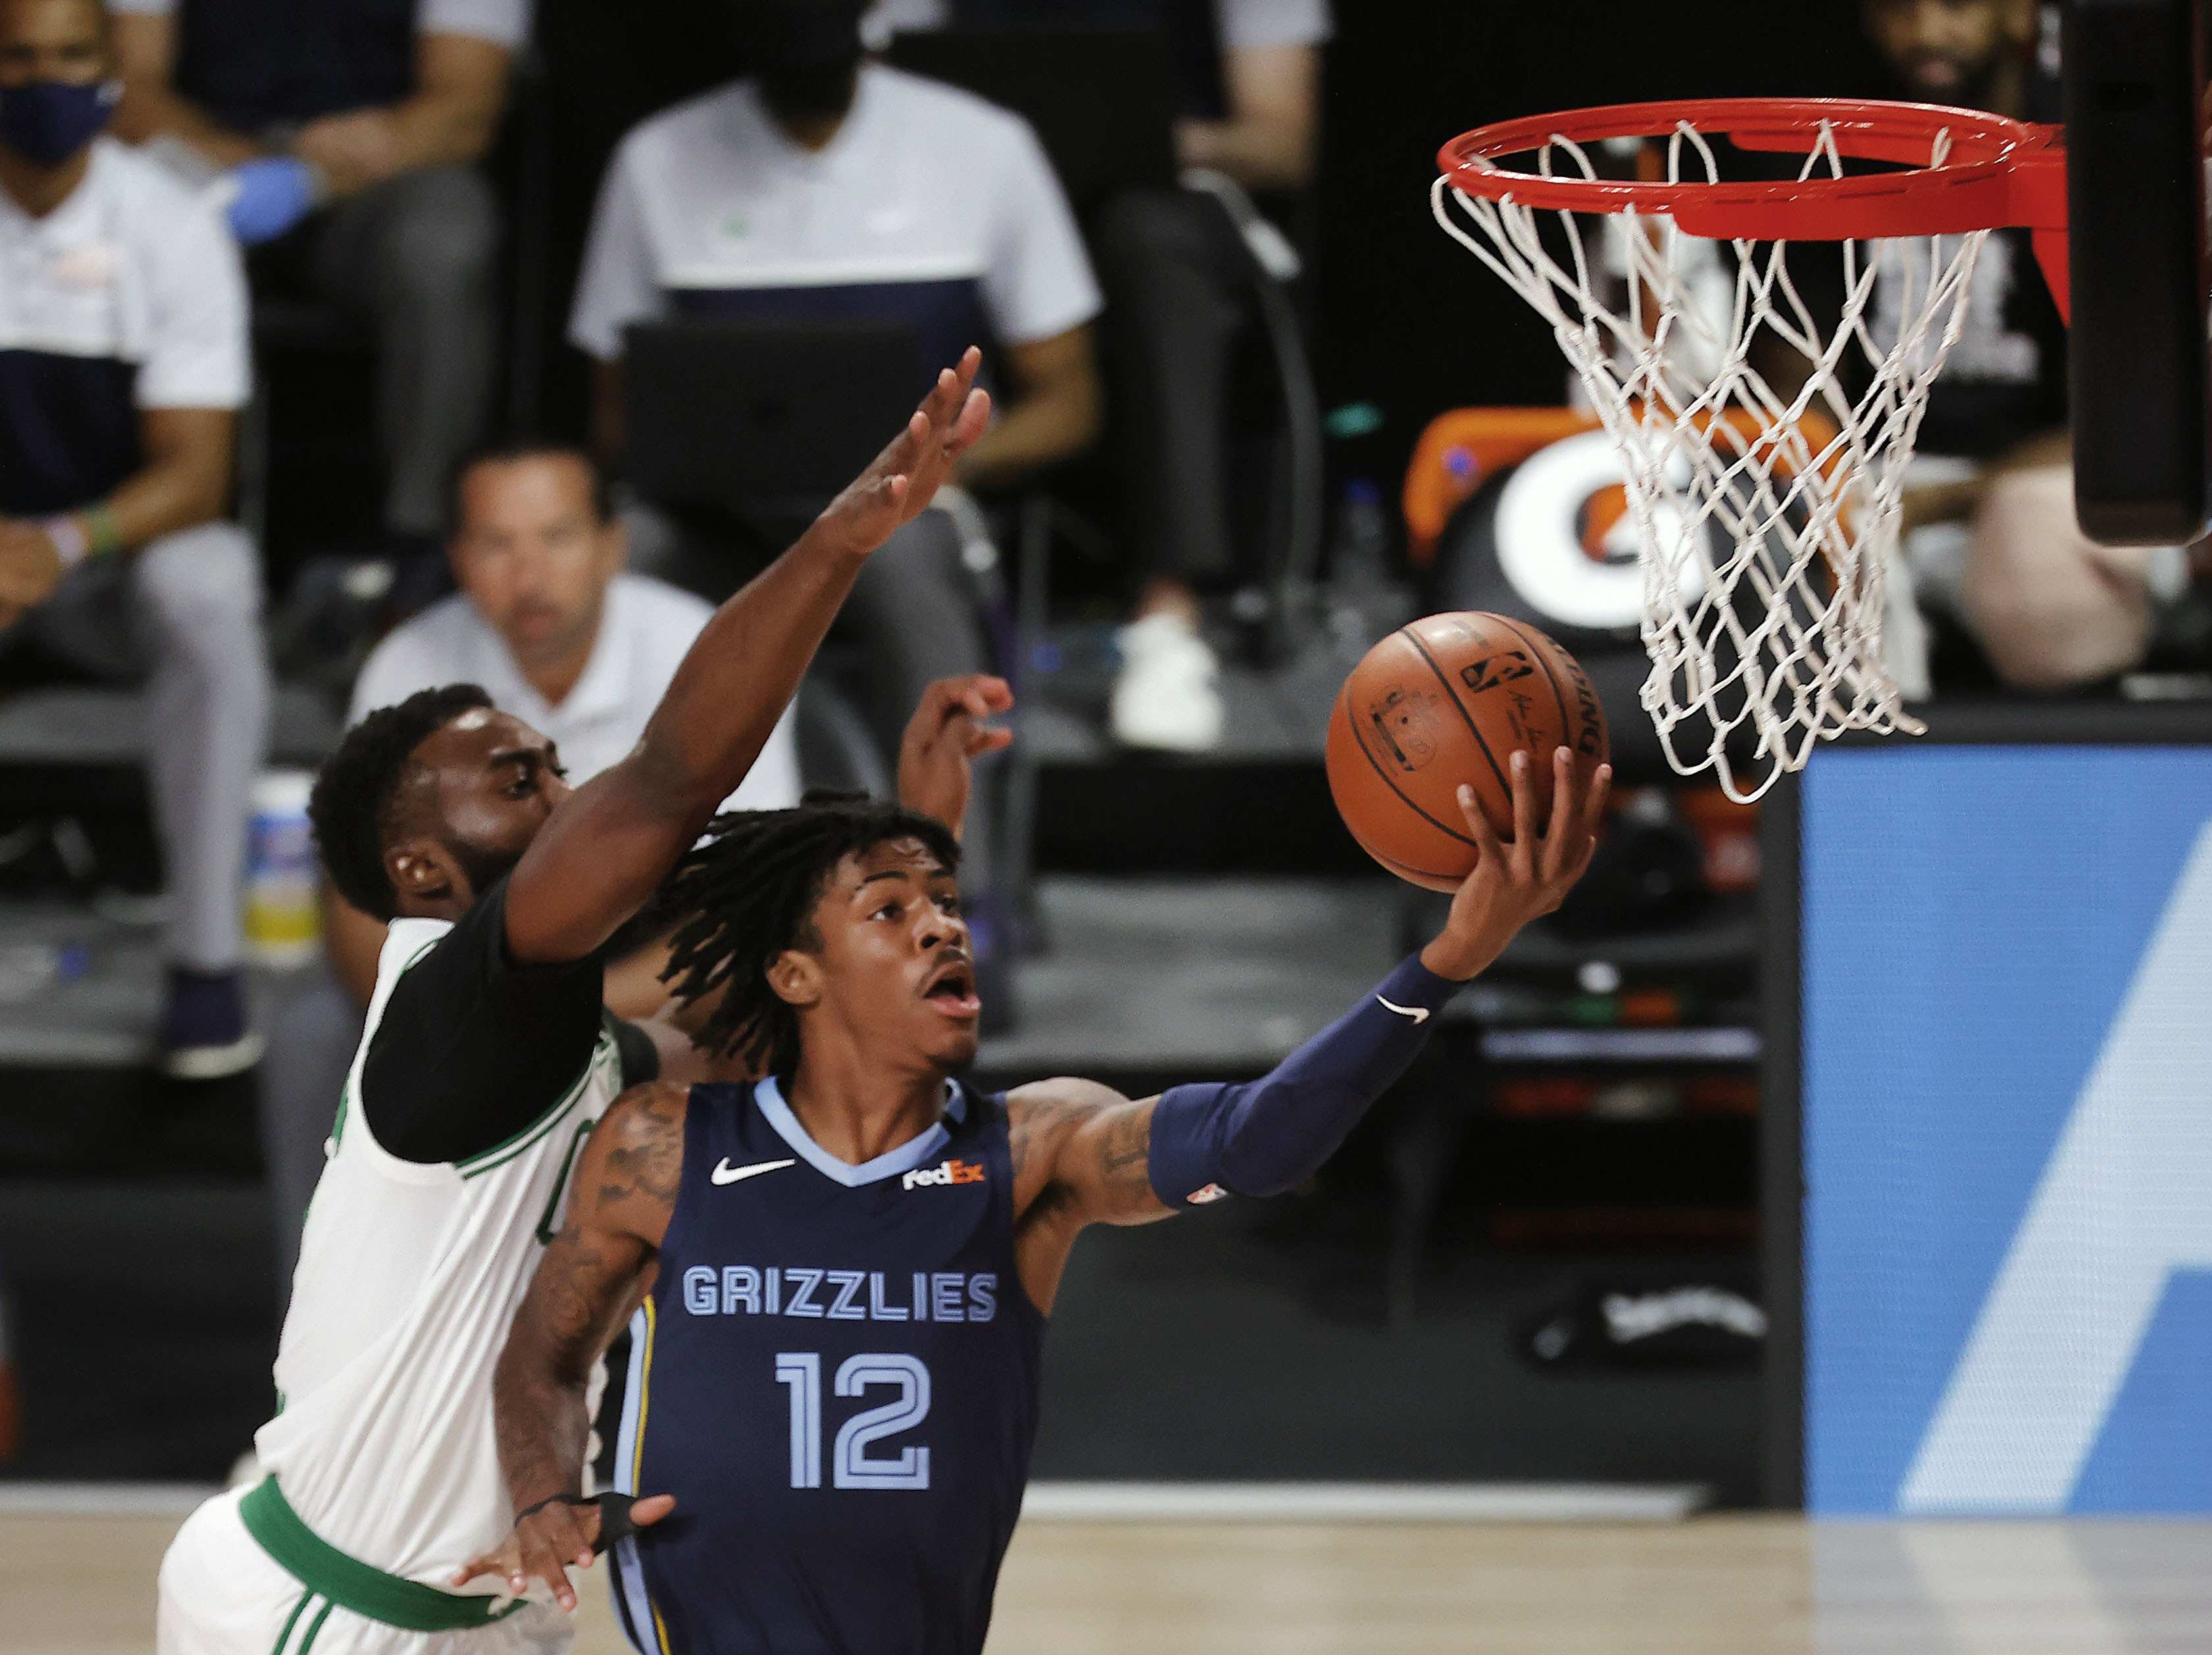 Here's how the Celtics' win over the Grizzlies affects the draft pick  Memphis owes Boston - The Boston Globe